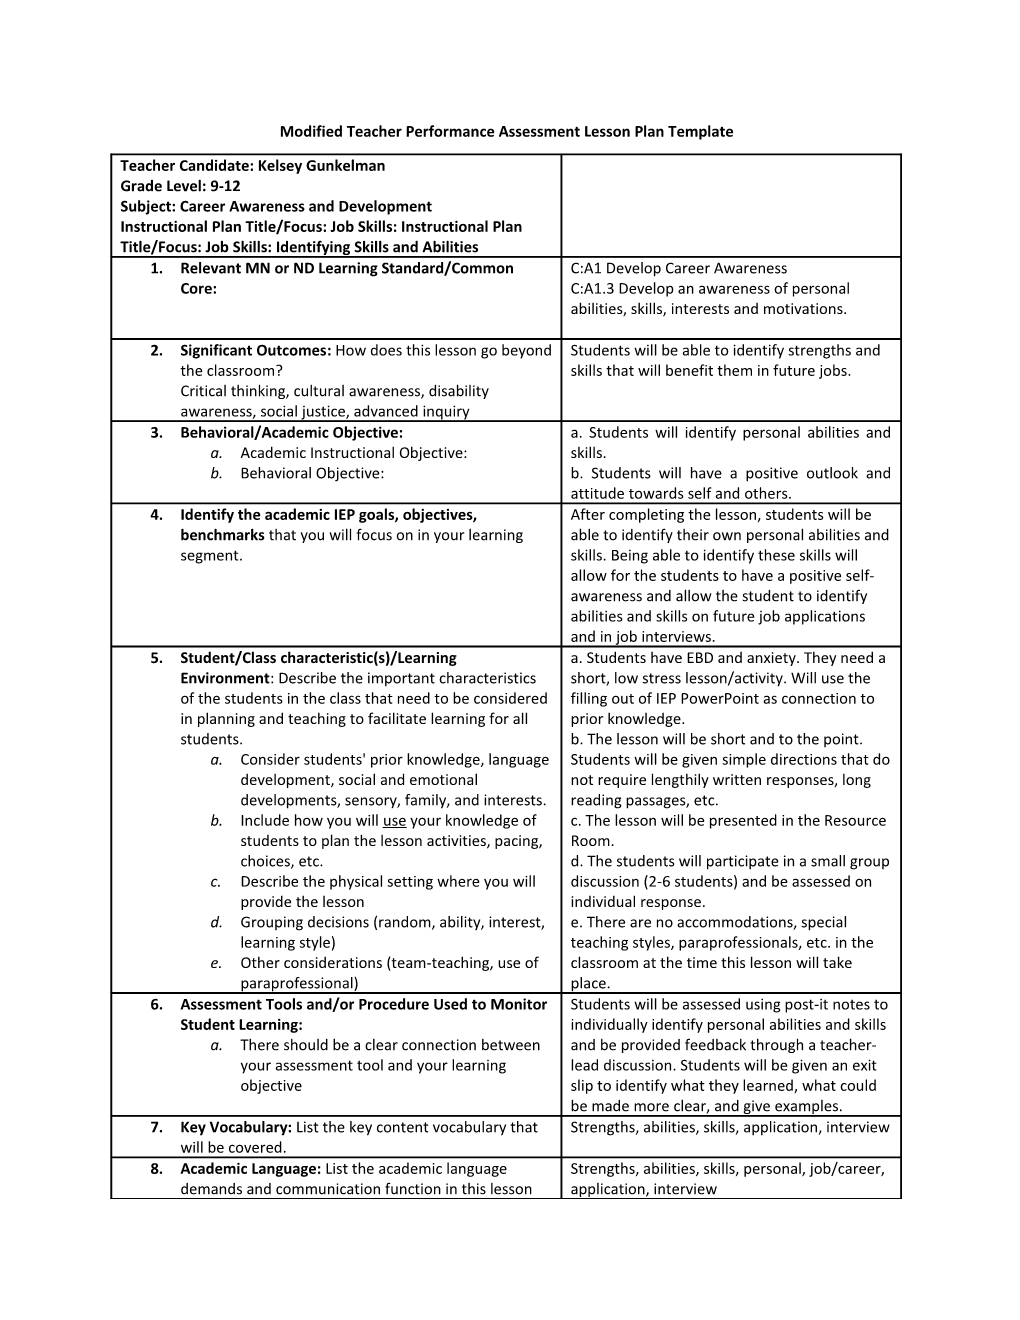 TPA Lesson Plan Template